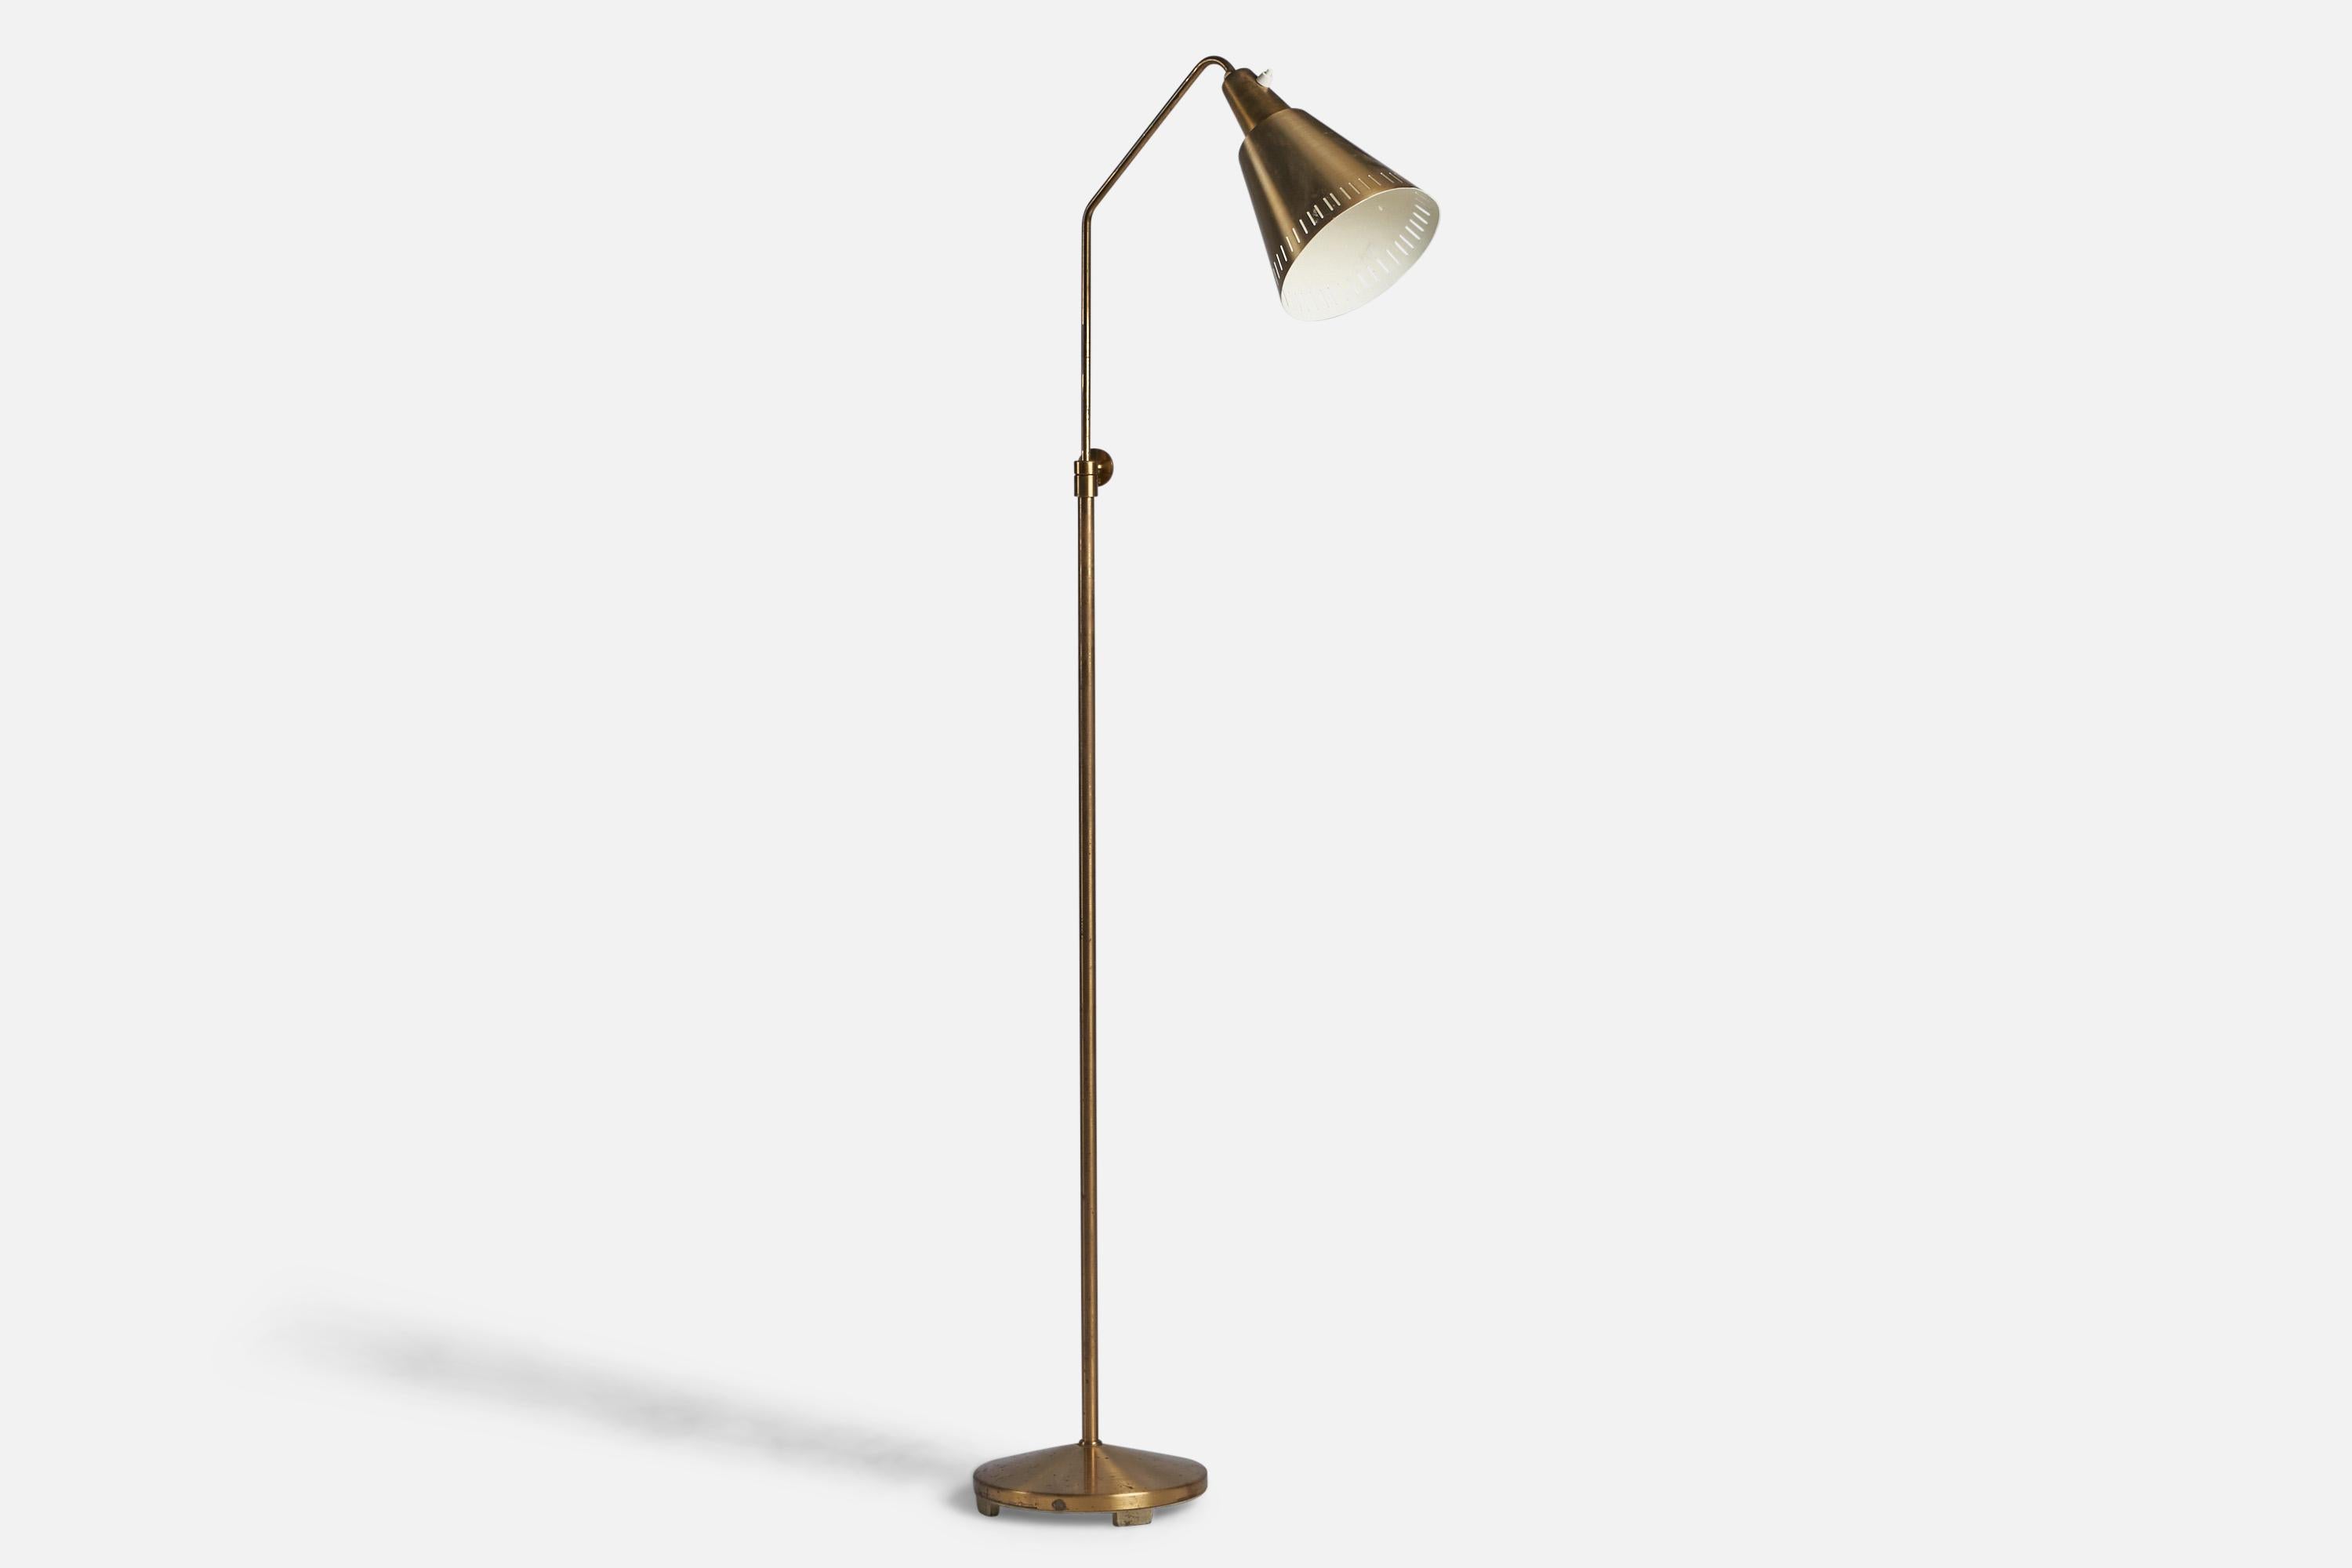 An adjustable brass floor lamp produced by ASEA and design attributed to Hans Bergström, Sweden, 1940s.

Overall Dimensions (inches): 58.25” H x 7.15” W x 24” D
Bulb Specifications: E-26 Bulb
Number of Sockets: 1
All lighting will be converted for